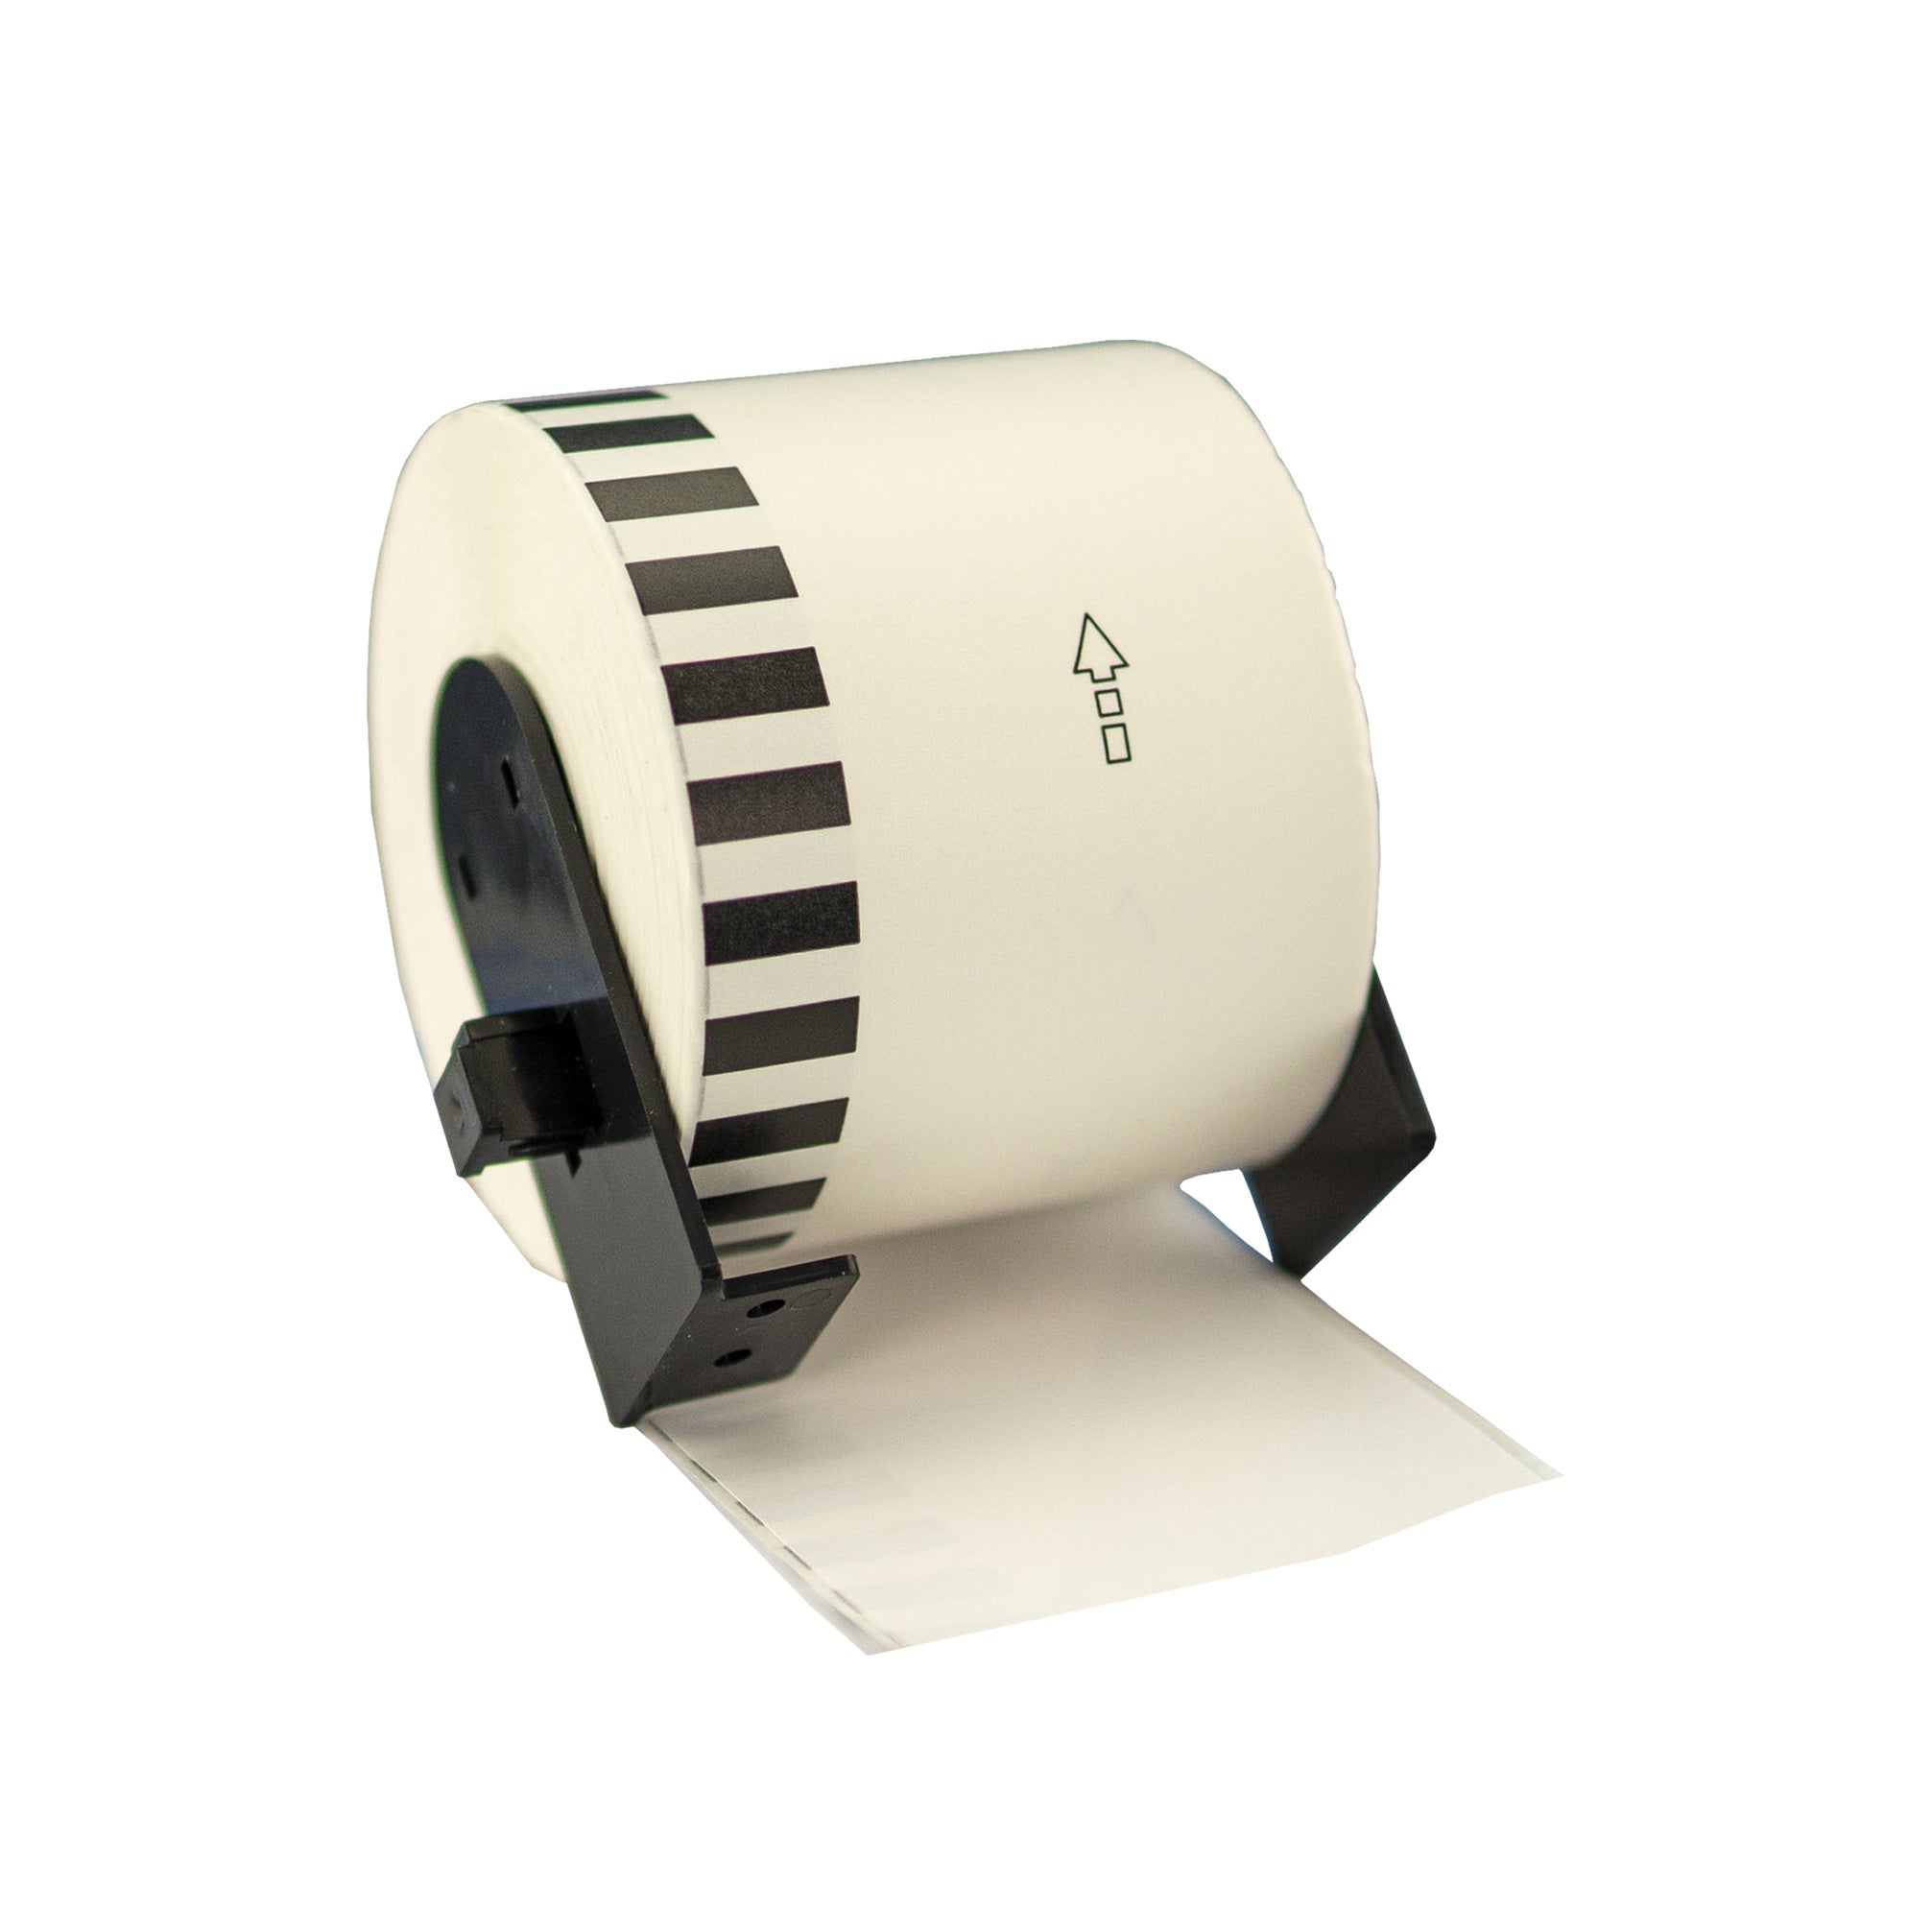 Compatible Brother DK-11202 Shipping White Labels 62 x 100mm/ 50 Rolls